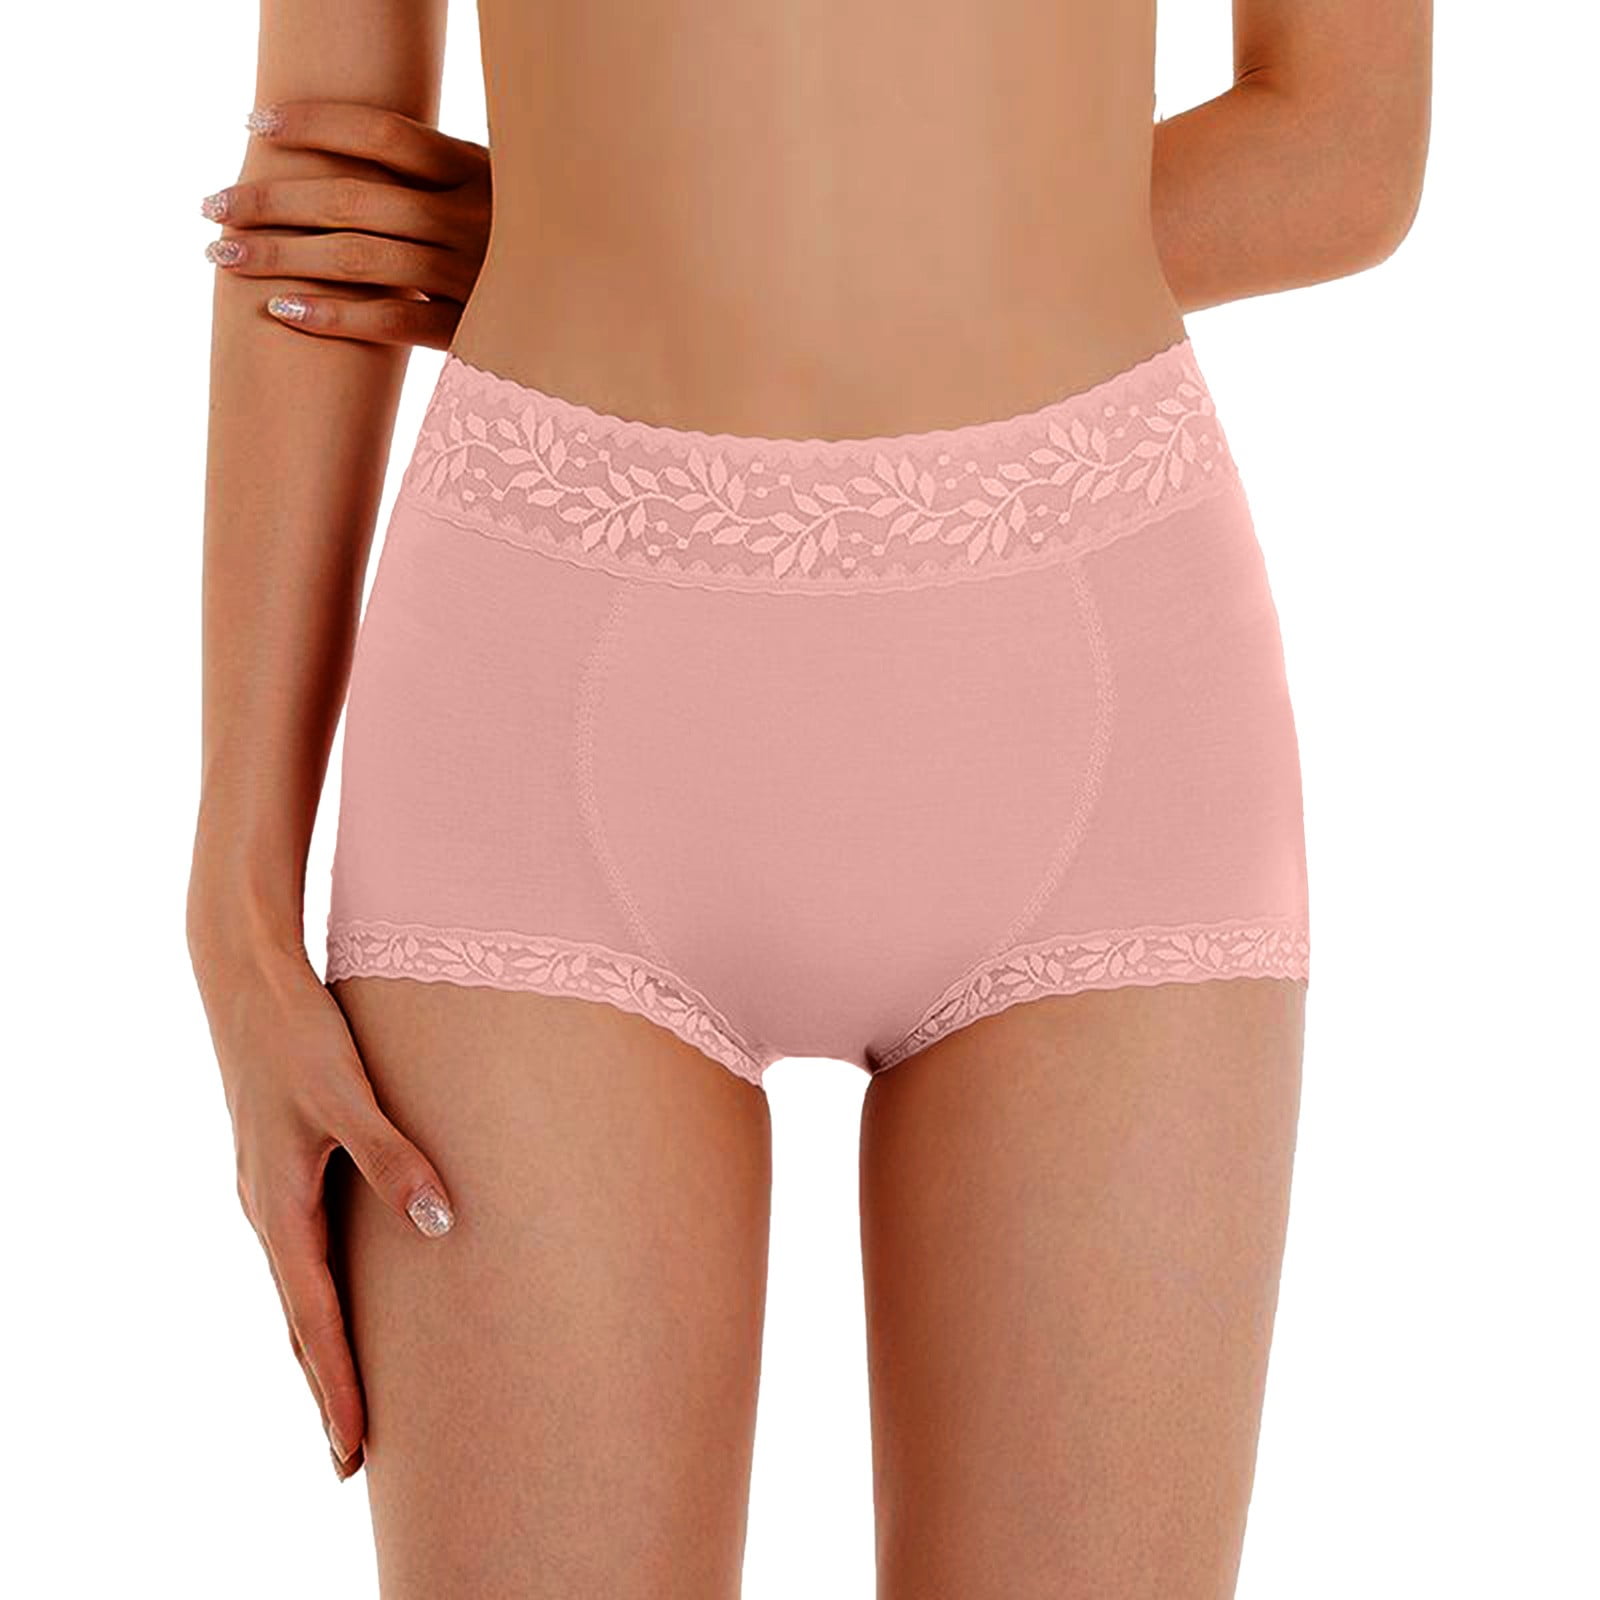 Eashery Thinx Period Panties for Teens Cotton High Waisted s